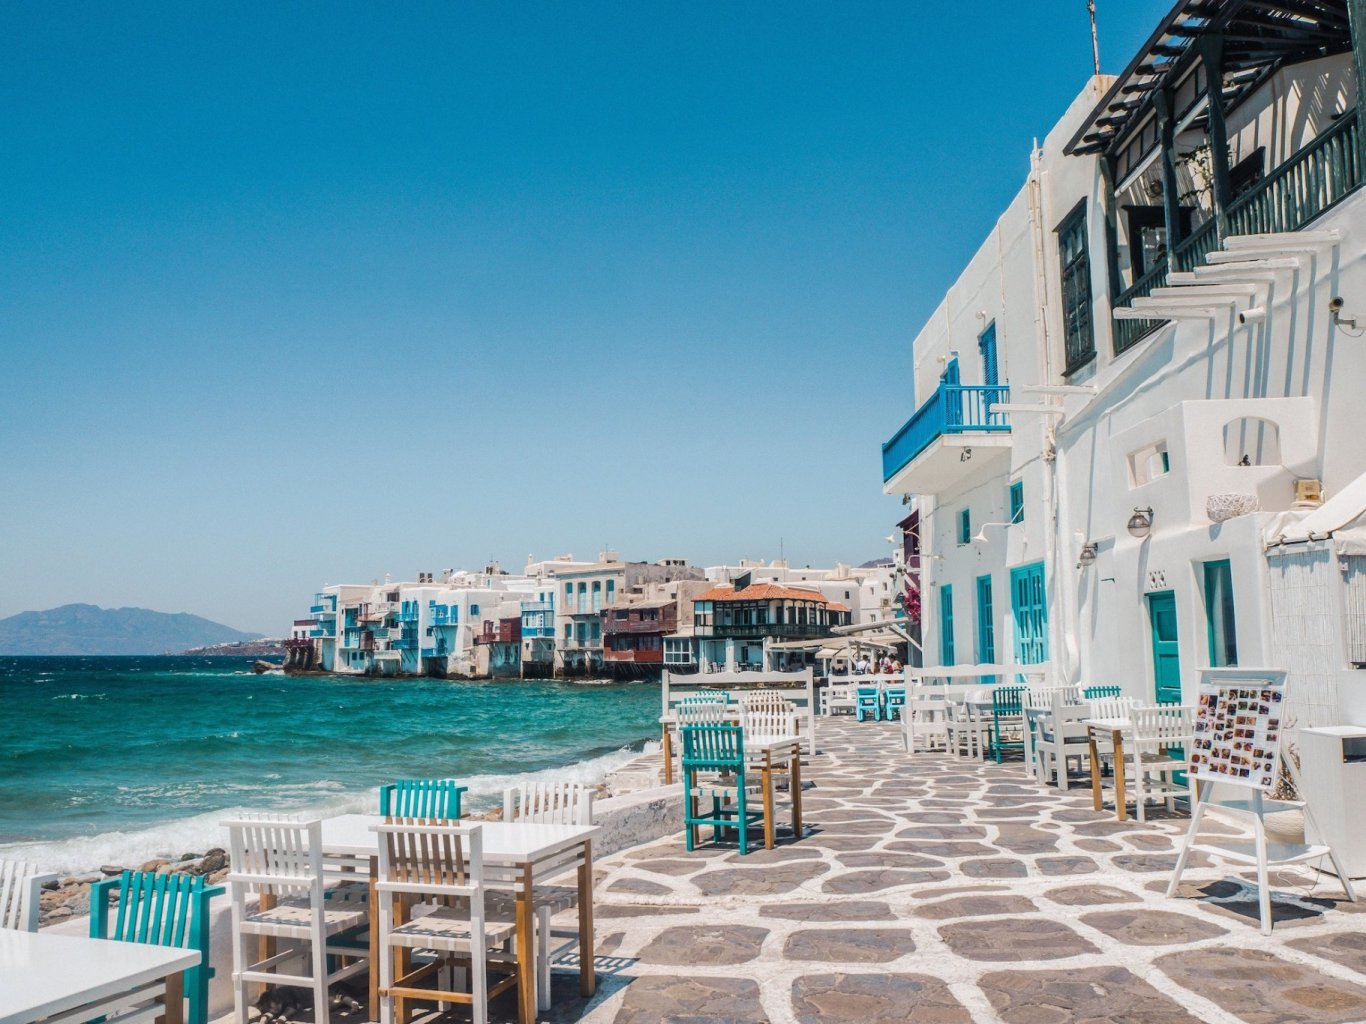 A photo of white and blue houses along the bright blue waterfront in Paros, Greece